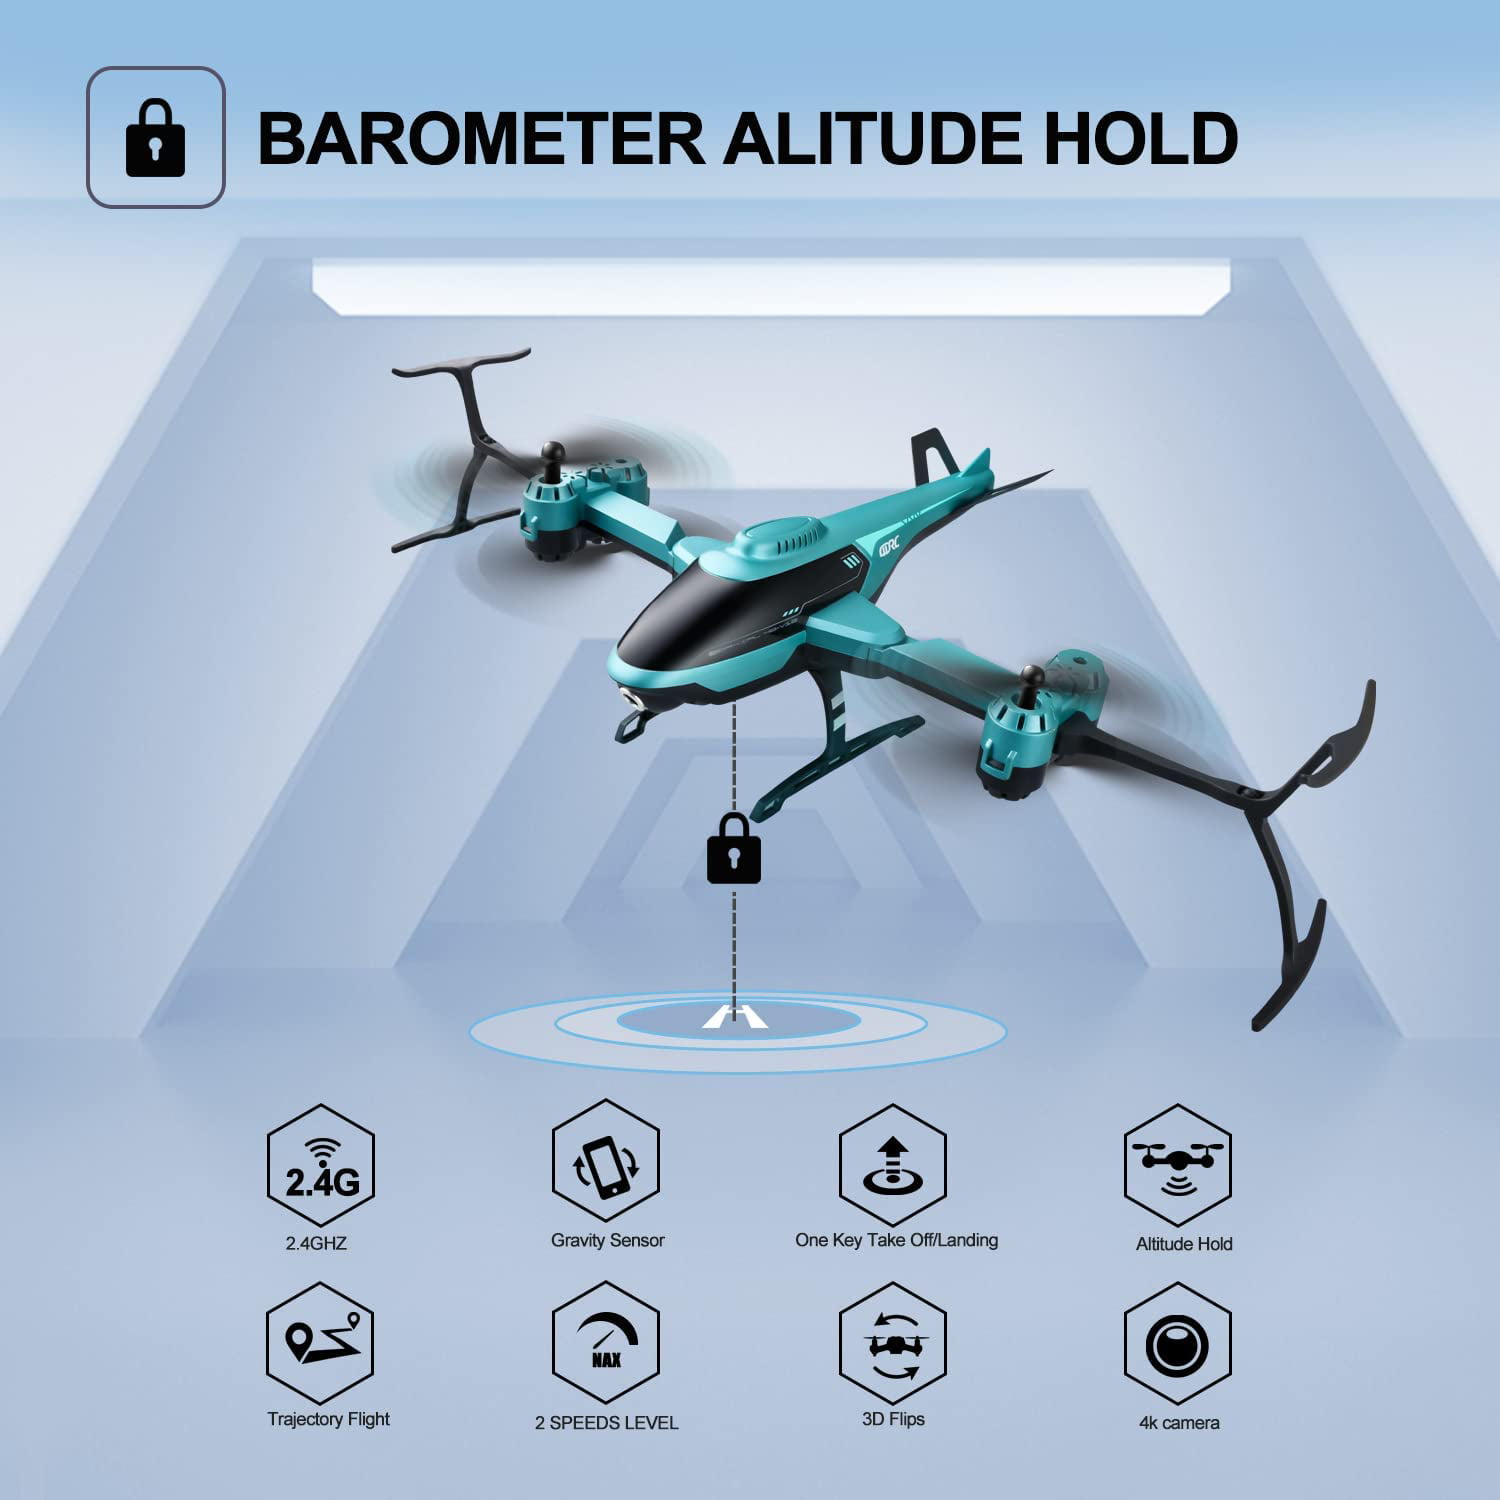 4DRC Mini Drone for Kids with 1080P HD Camera, Foldable FPV Live Video  Quarcopter for adults,With Altitude Hold, Headless Mode, One Key Start, 3D